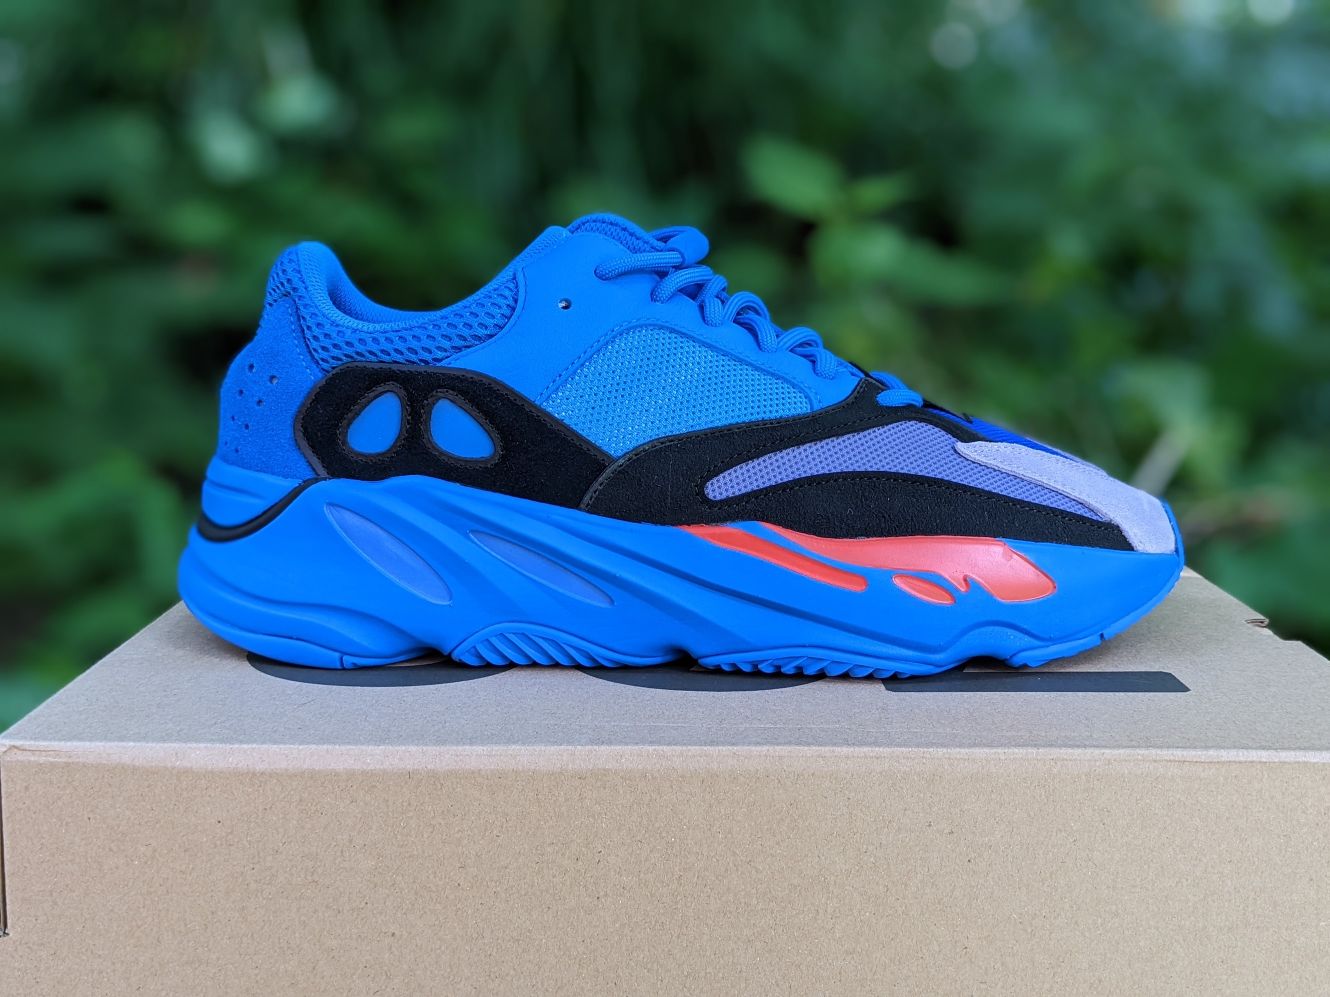 Yeezy 700 Hi Res Blue: Actual Quality (at a Price)